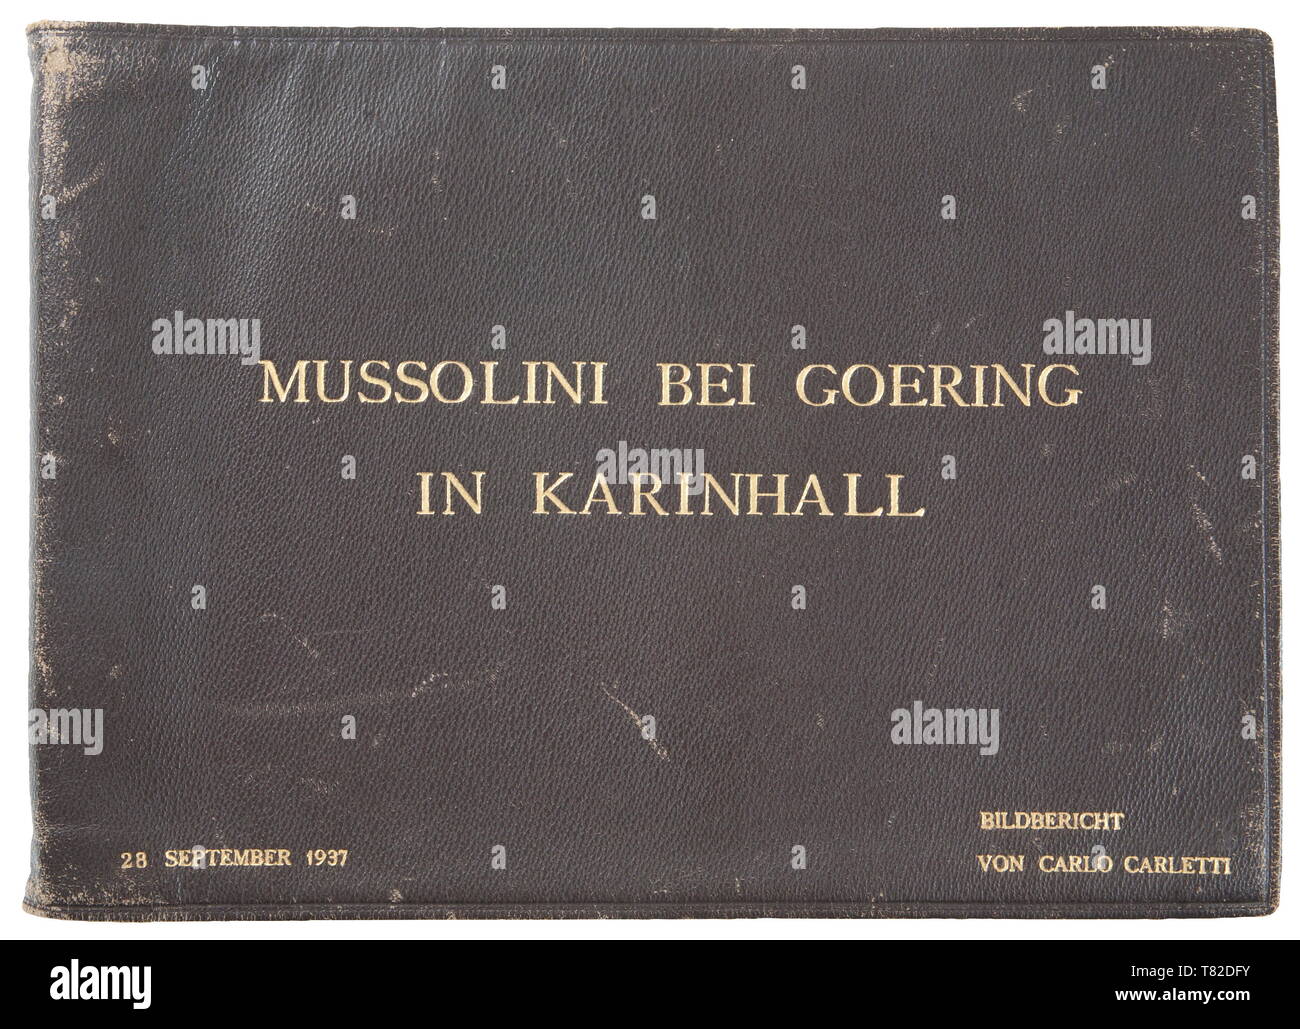 Hermann Göring - A photo album of Mussolini's official visit to Carinhall Large format photo album (34 x 24 cm) with brown leather cover with gold-embossed "MUSSOLINI BEI GOERING IN KARINHALL", "28 SEPTEMBER 1937" and "BILDBERICHT VON CARLO CARLETTI". Album consists of eighteen 17 x 23 cm black and white photos. Photos are of a casual/informal style and feature Hermann Göring, Emma Göring, Mussolini, Count Ciano, Achille Starace, Luftwaffe Generals Milch, Stumpf, and Bodenschatz, Paul Schmidt, SS General Dietrich, and more. From the possession of a US officer of the 101st A, Editorial-Use-Only Stock Photo